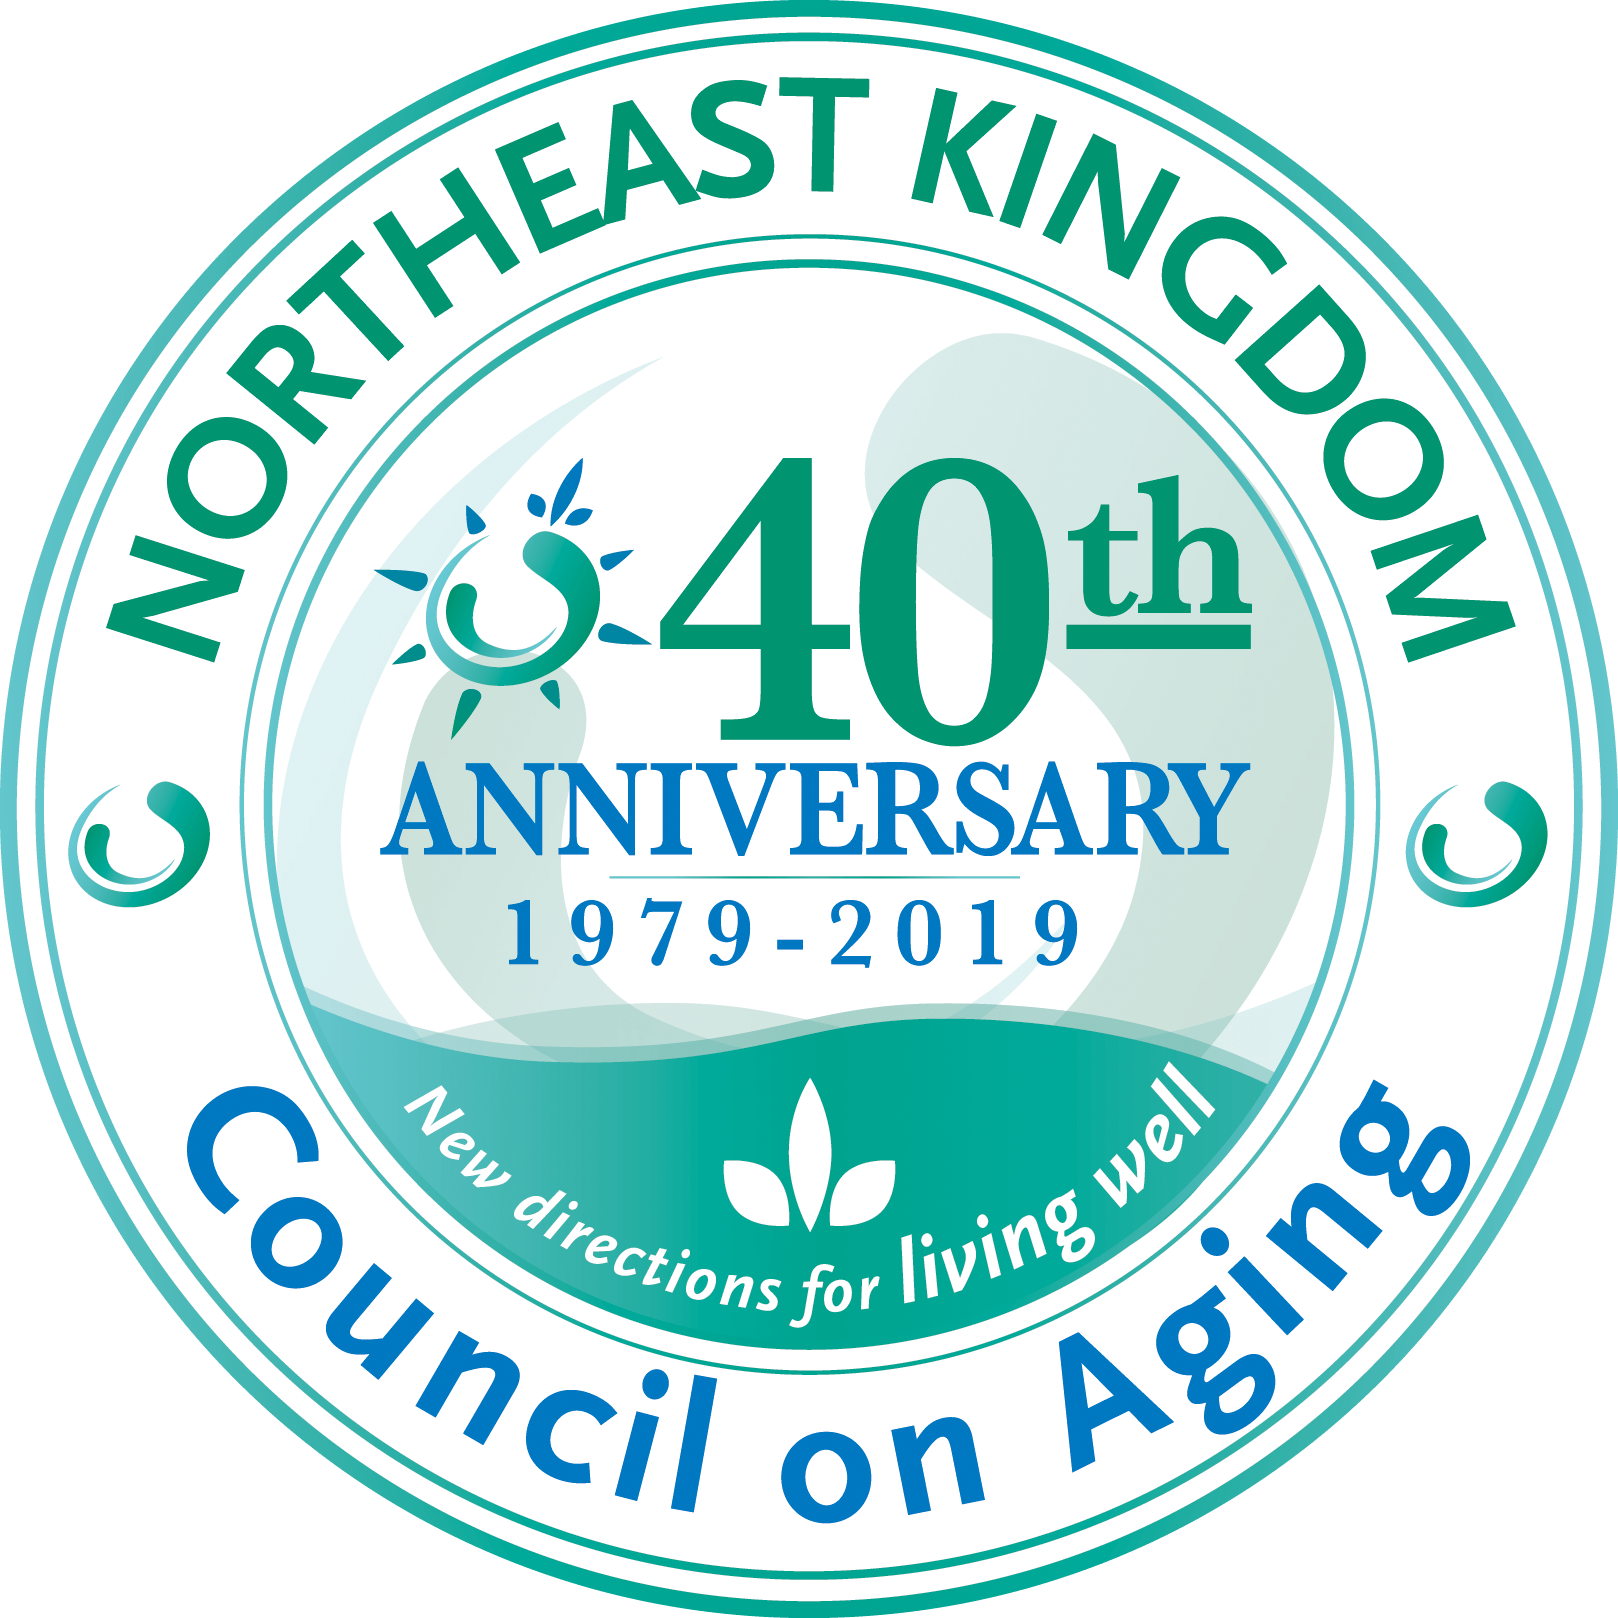 Northeast Kingdom Council on Aging 40th Anniversary Seal